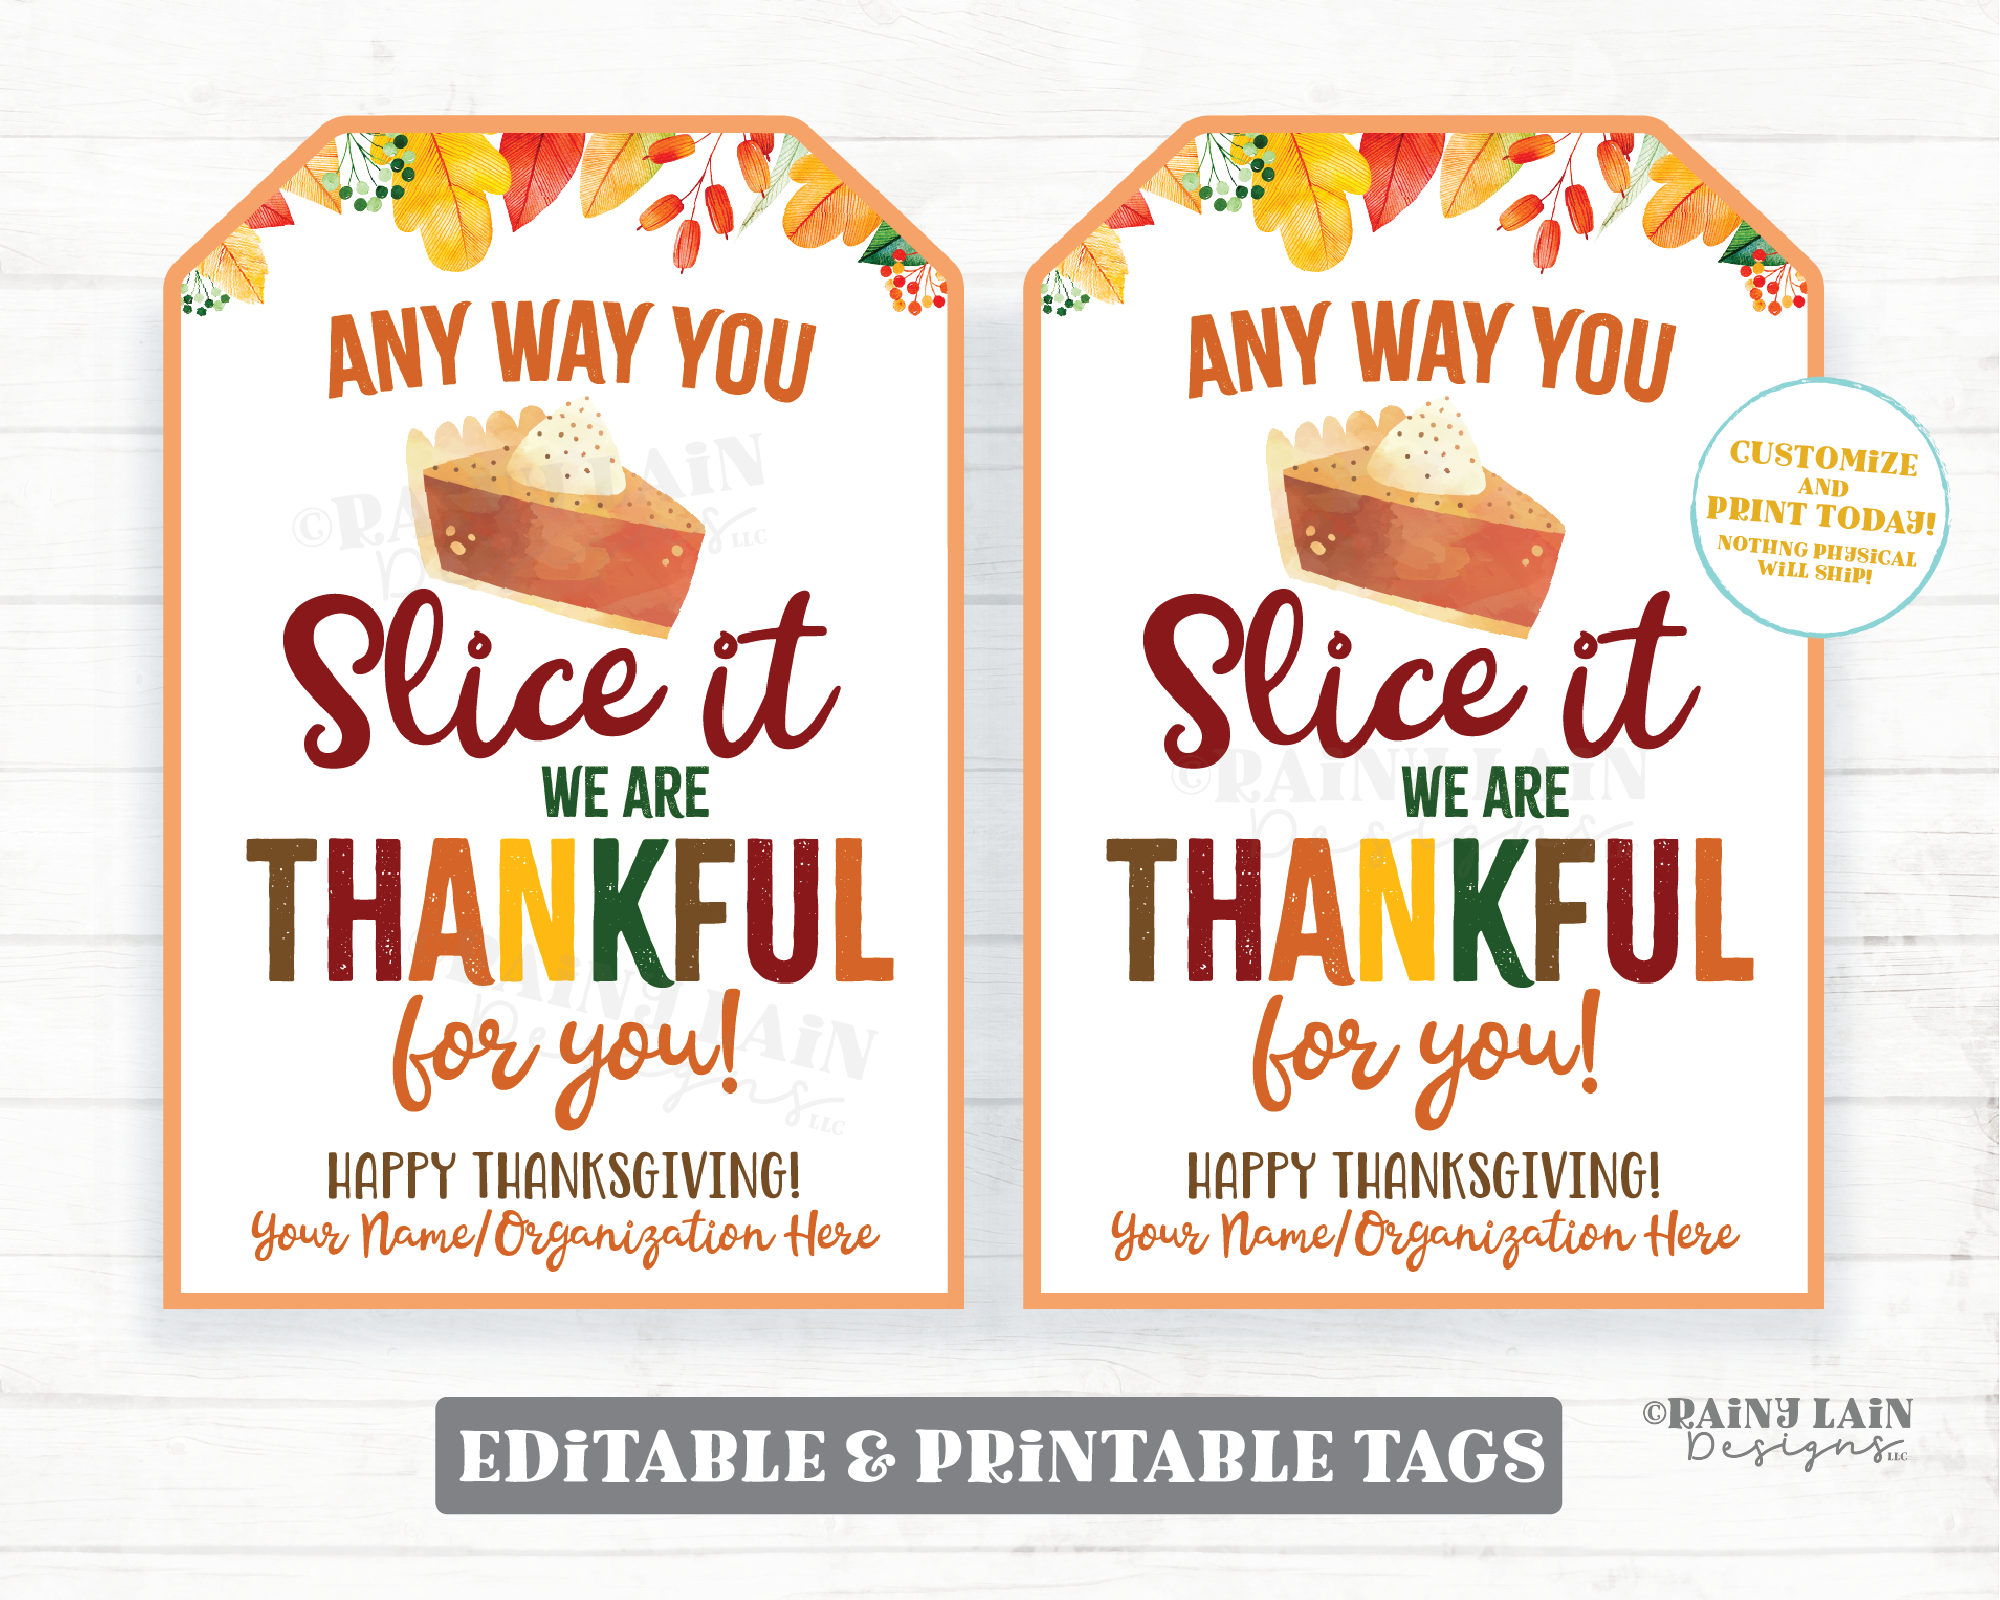 Any way you Slice it Pumpkin Pie Appreciation Tag Thankful Tag Pie Thank You Pie Gift Tag Employee Co-Worker Staff Corporate Realtor Teacher